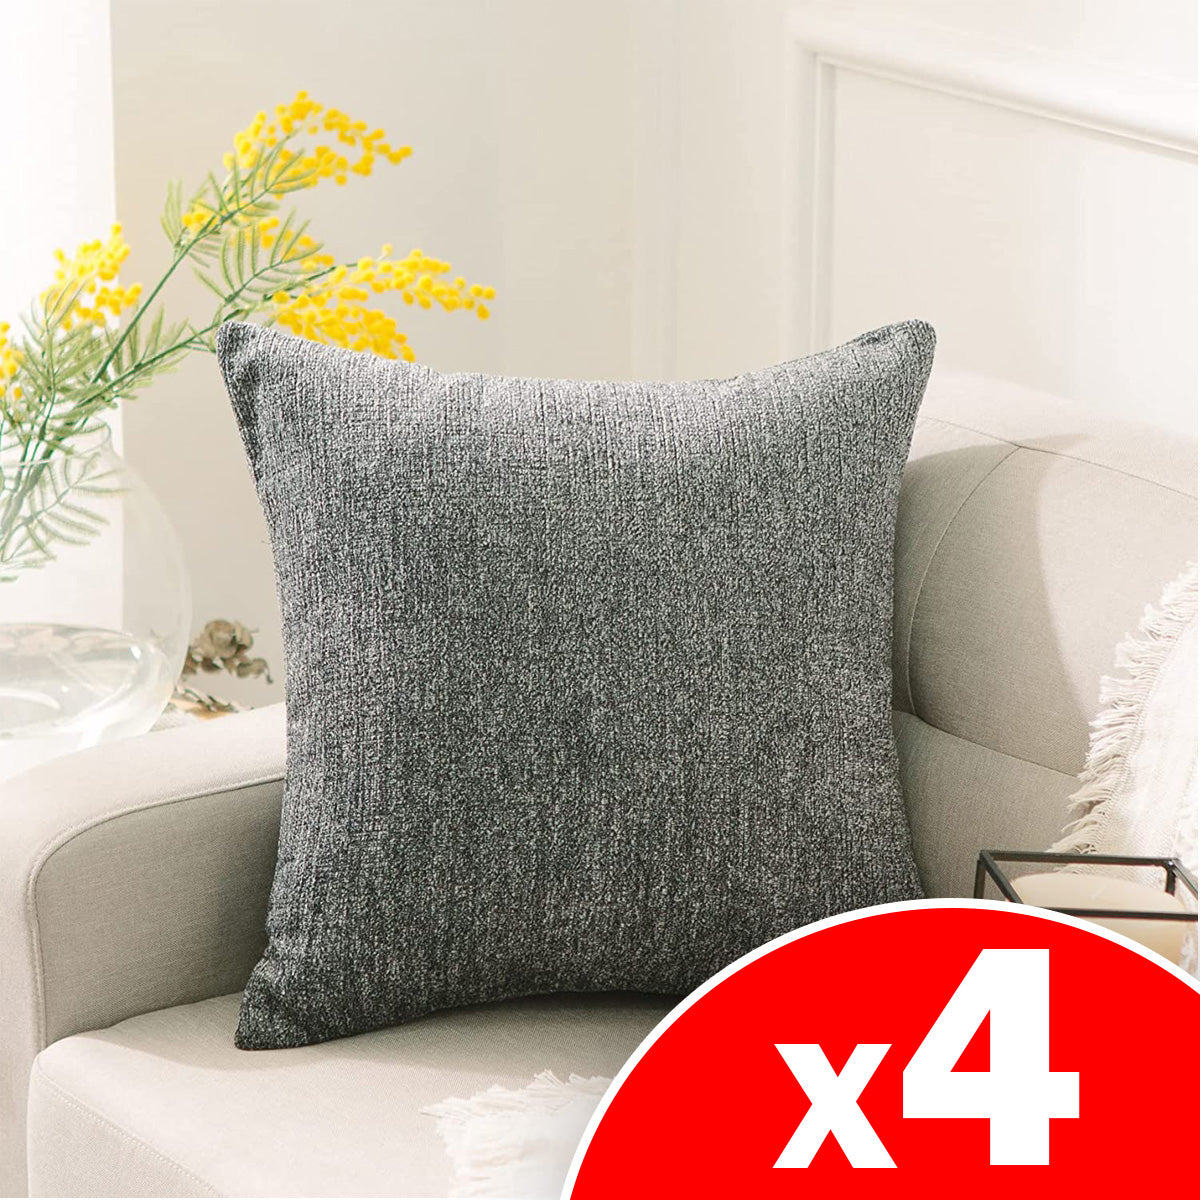 Decorative Chenille Pillow, Grey, 4 Pack